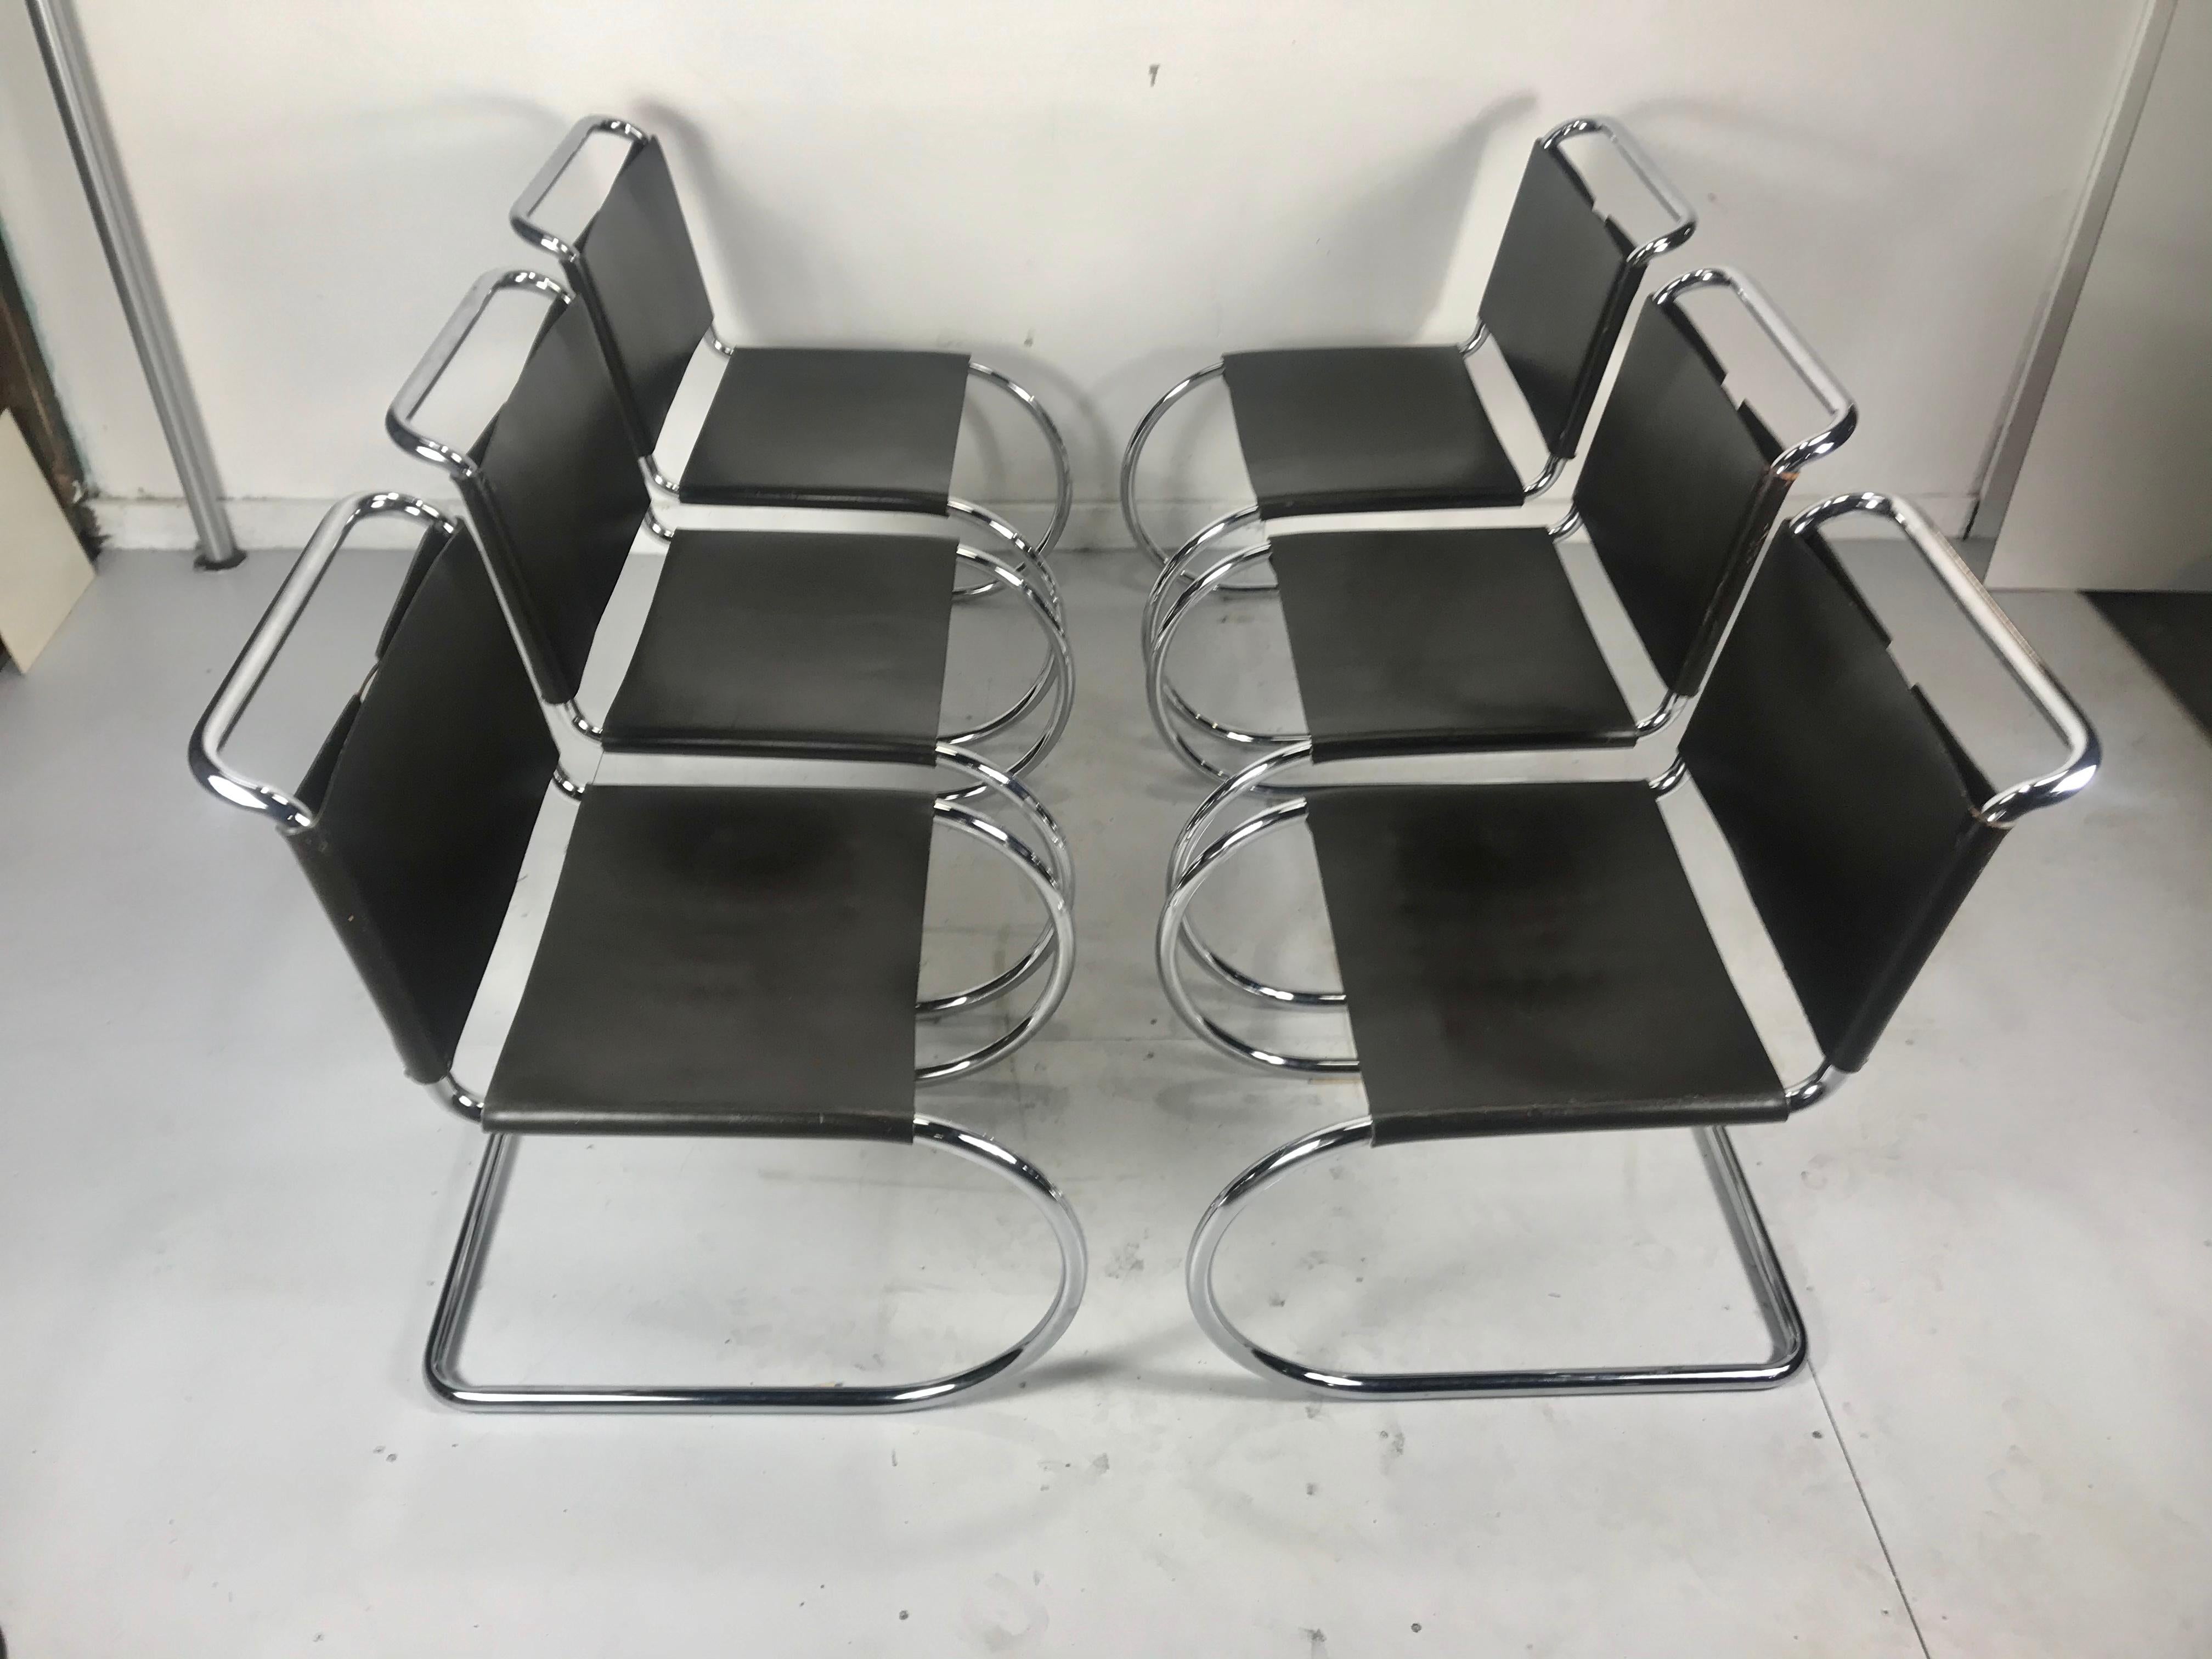 A stunning set of 6 Classic black leather and chrome lace back Mies van der Rohe MR10 cantilever chairs produced by Knoll International.



These chairs are a design icon being one of the very first cantilever design chairs ever designed by van